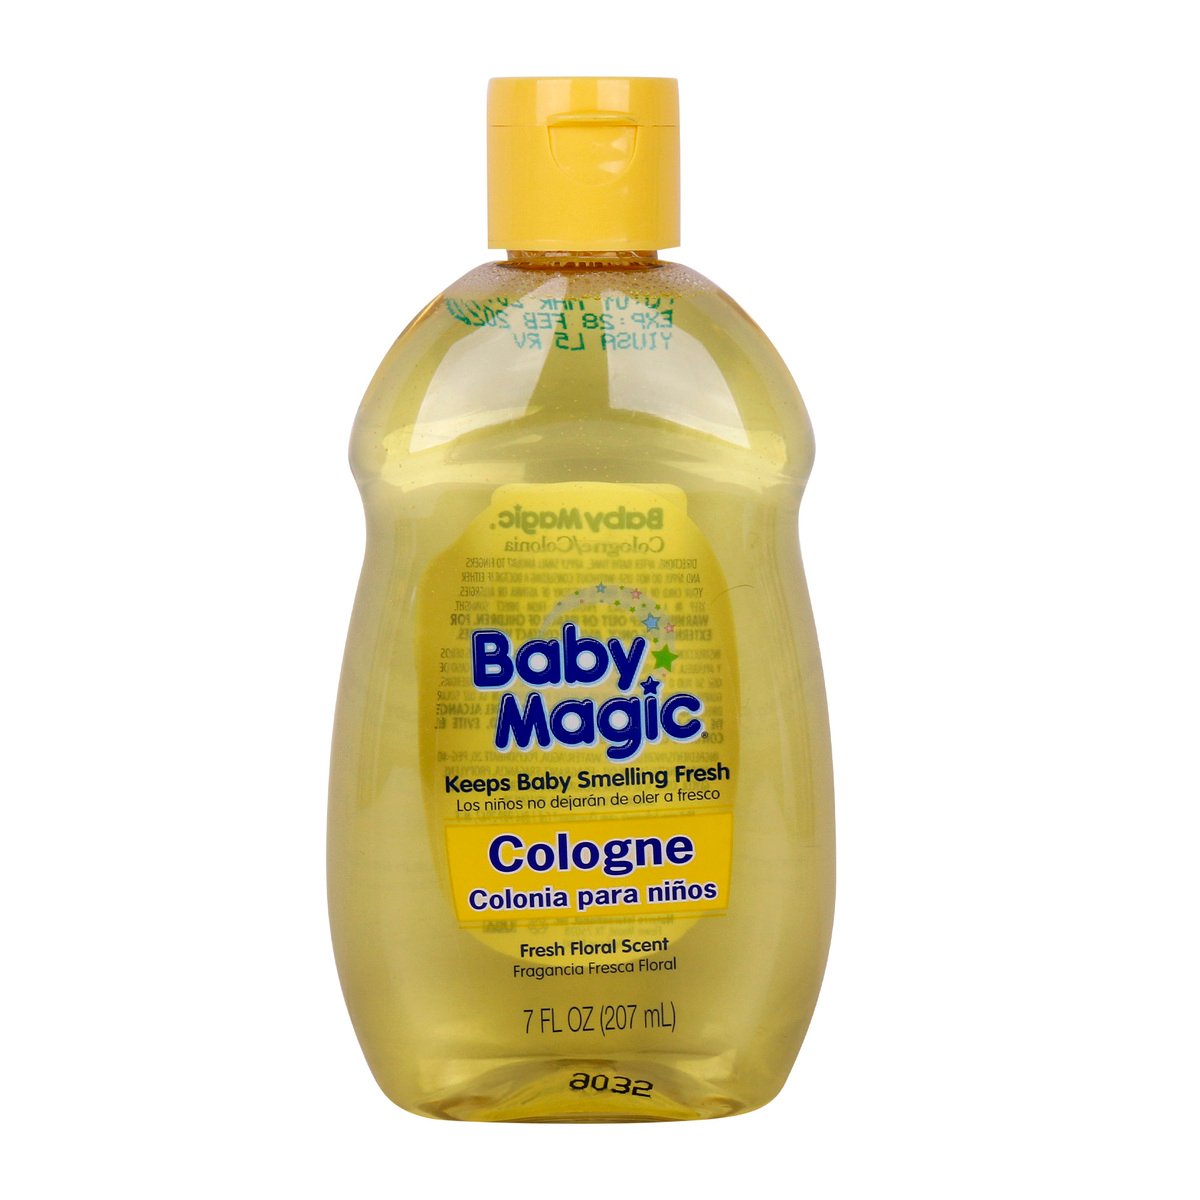 Baby Magic Cologne Fresh Floral Scent 207ml